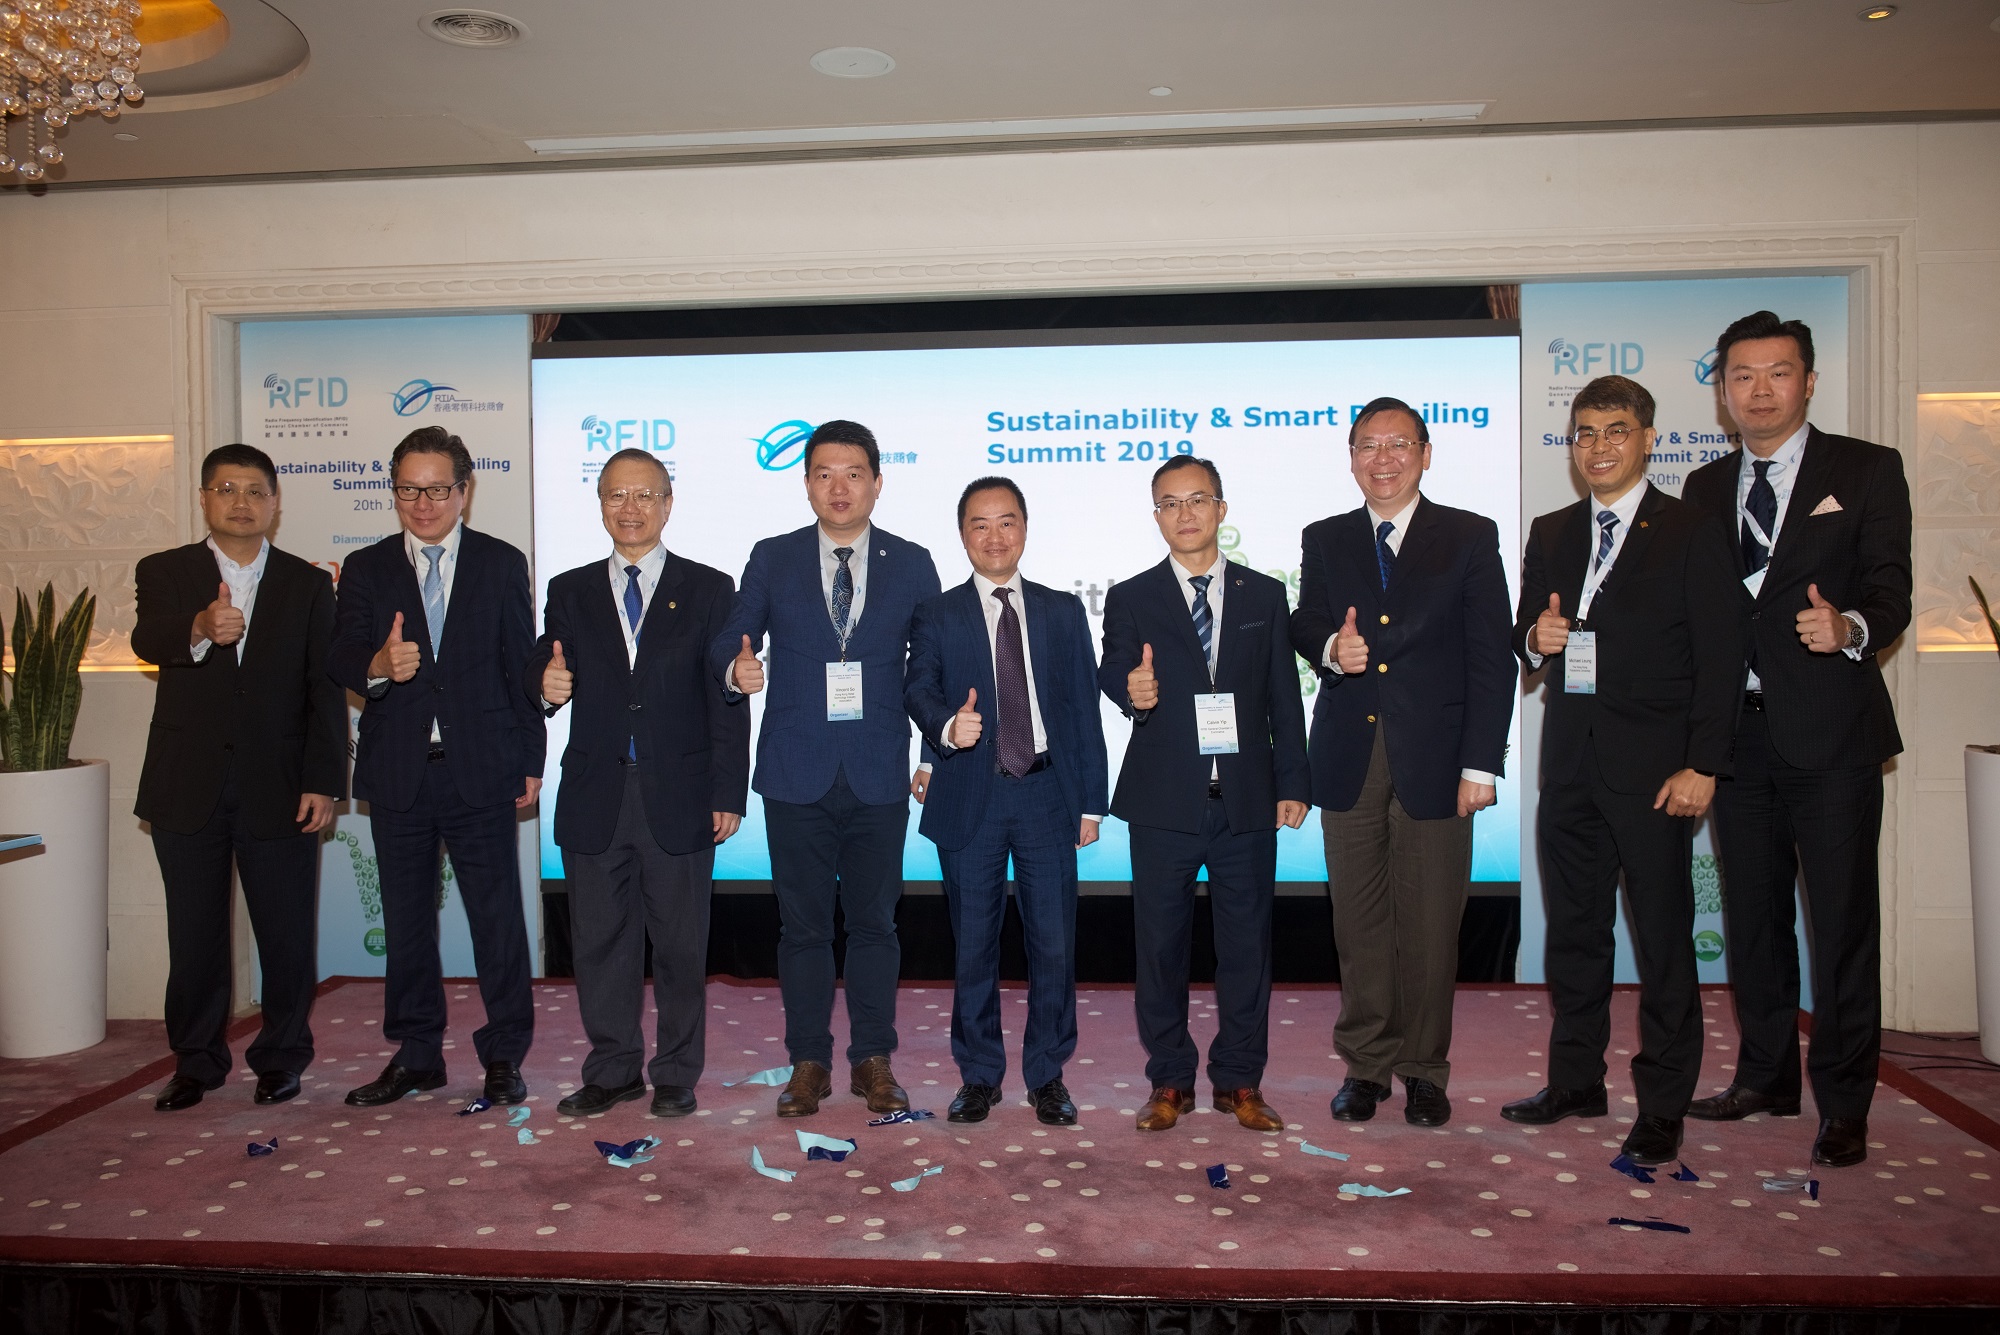 Mr. Tony Wong, Assistant Government Chief Information Officer (Industry Development) (centre), Mr Calvin Yip, Chairman, Radio Frequency Identification General Chamber of Commerce (RFIDGCC) (fourth right), Mr Vincent So, Chairman, Hong Kong Retail Technology Industry Association (HKRTIA) (fourth left), Mr. Simon Wong, Chief Executive Officer, Logistics and Supply Chain MultiTech R&D Centre (third right), Dr. LUI Sun-wing, Honorary Consultant of RFIDGCC, Former Vice-President of the Hong Kong Polytechnic University (third left), Dr. Michael Leung, Director, Industrial Centre, Hong Kong Polytechnic University (second right), Dr Chan Wai-kai, Chief Principal, Hong Kong Baptist University Affiliated School Wong Kam Fai Secondary and Primary School (second left), Mr. Byron Yeung, Honorary Consultant, RFIDGCC (first right), Dr. Stephen Lam, Chief Operating Officer, GS1 Hong Kong (first left) at the “Sustainability & Smart Retailing Summit 2019”.